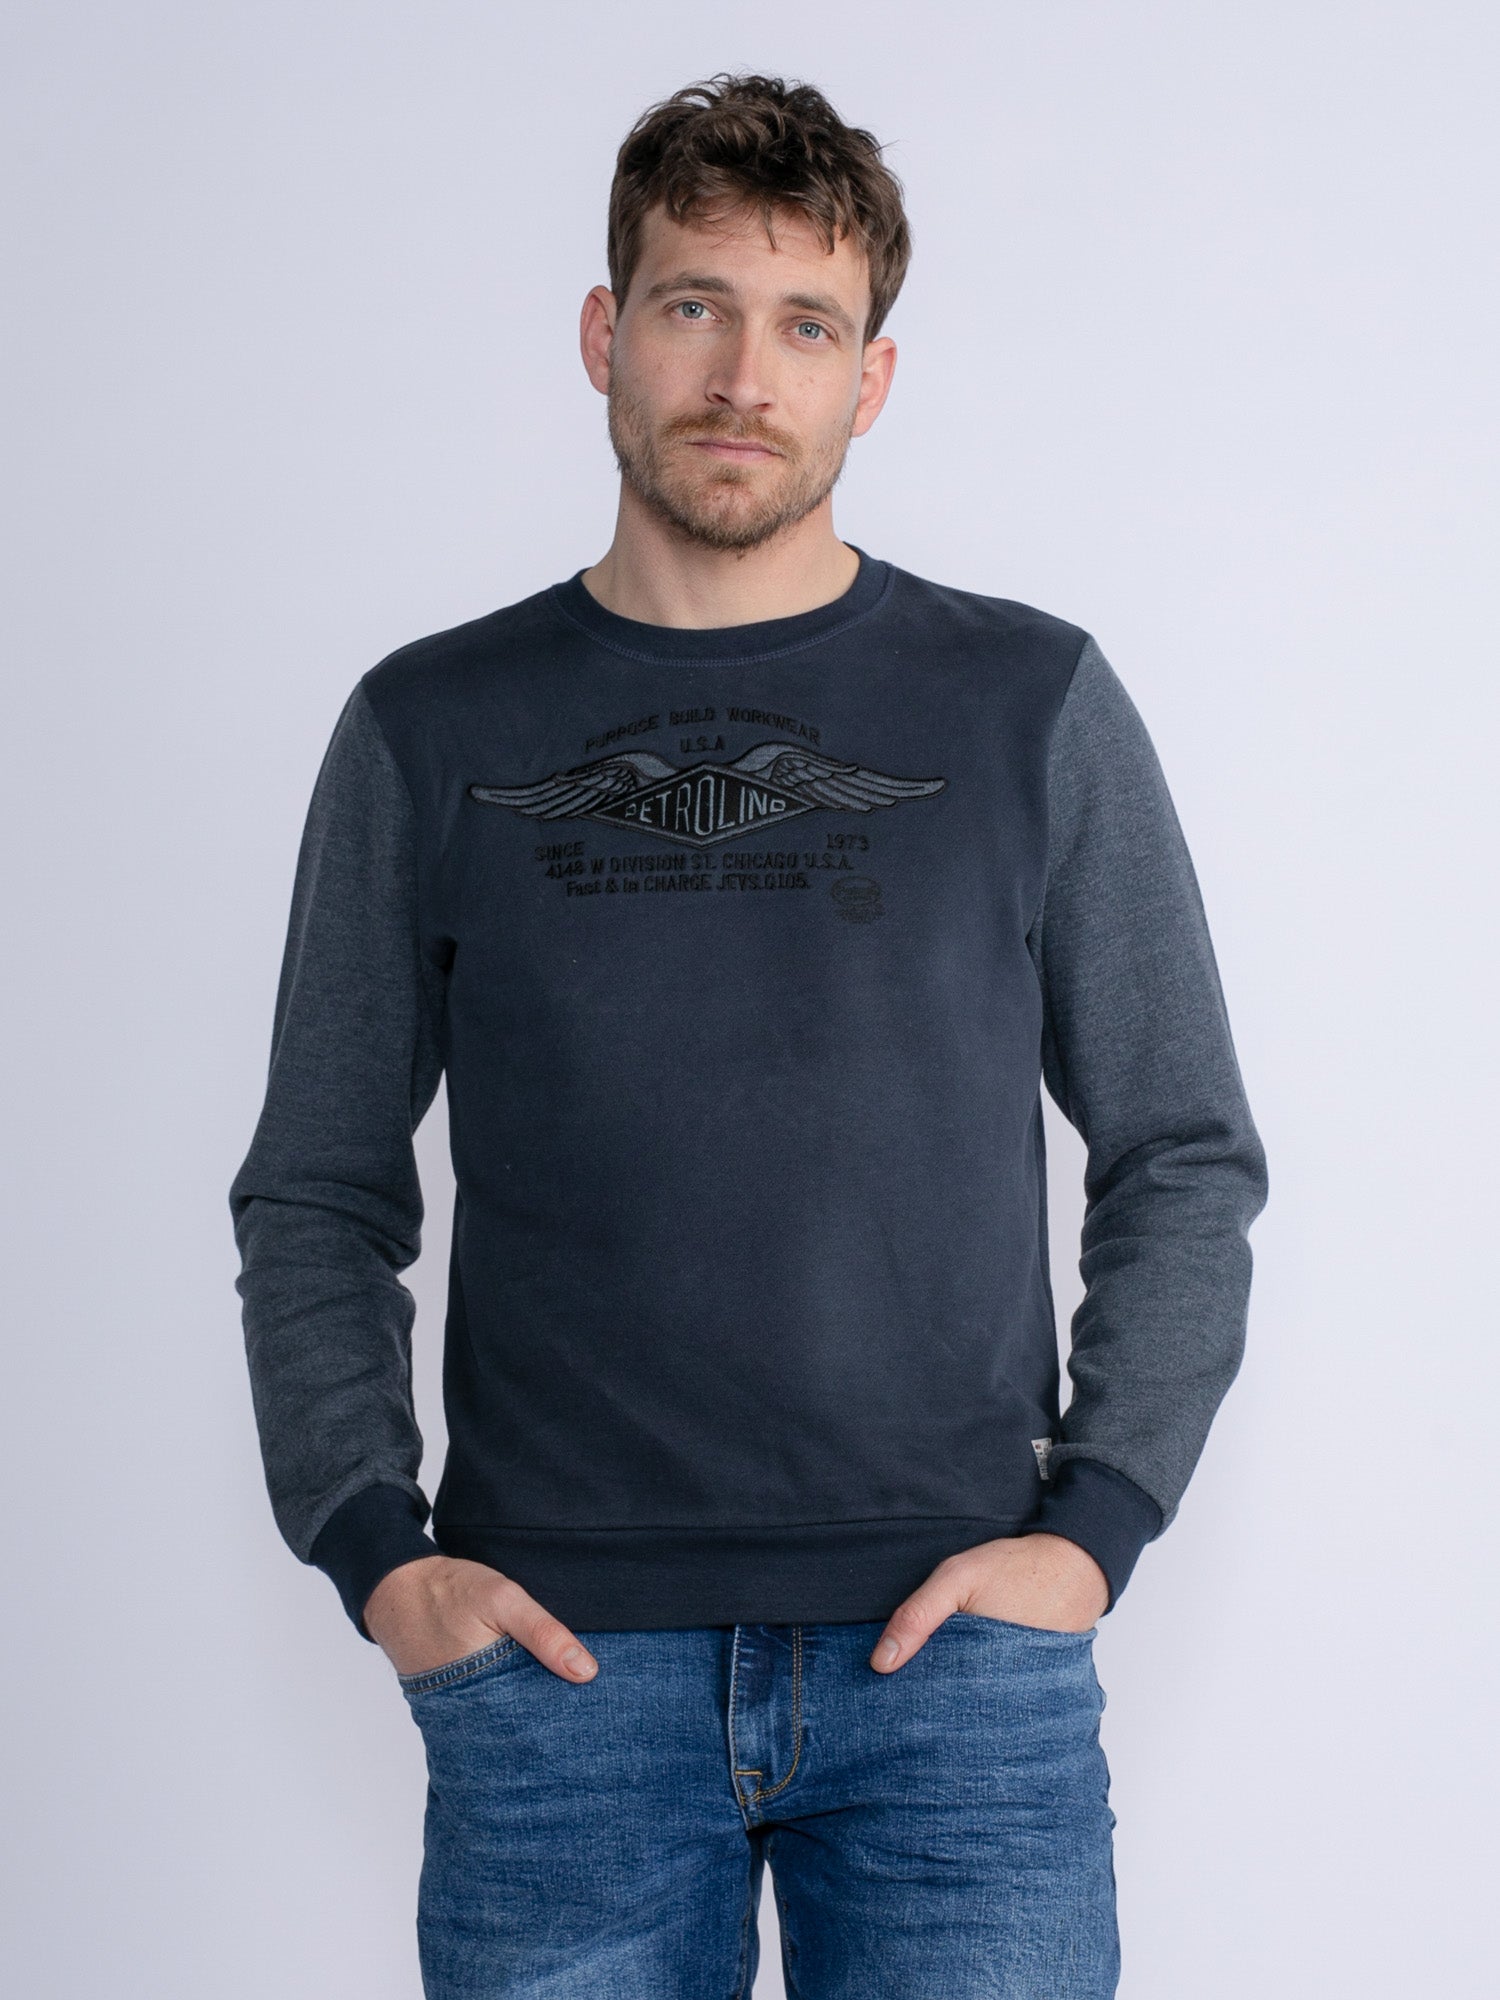 Industries® Official Collection Store | Online & Sweaters Hoodies Men - Petrol